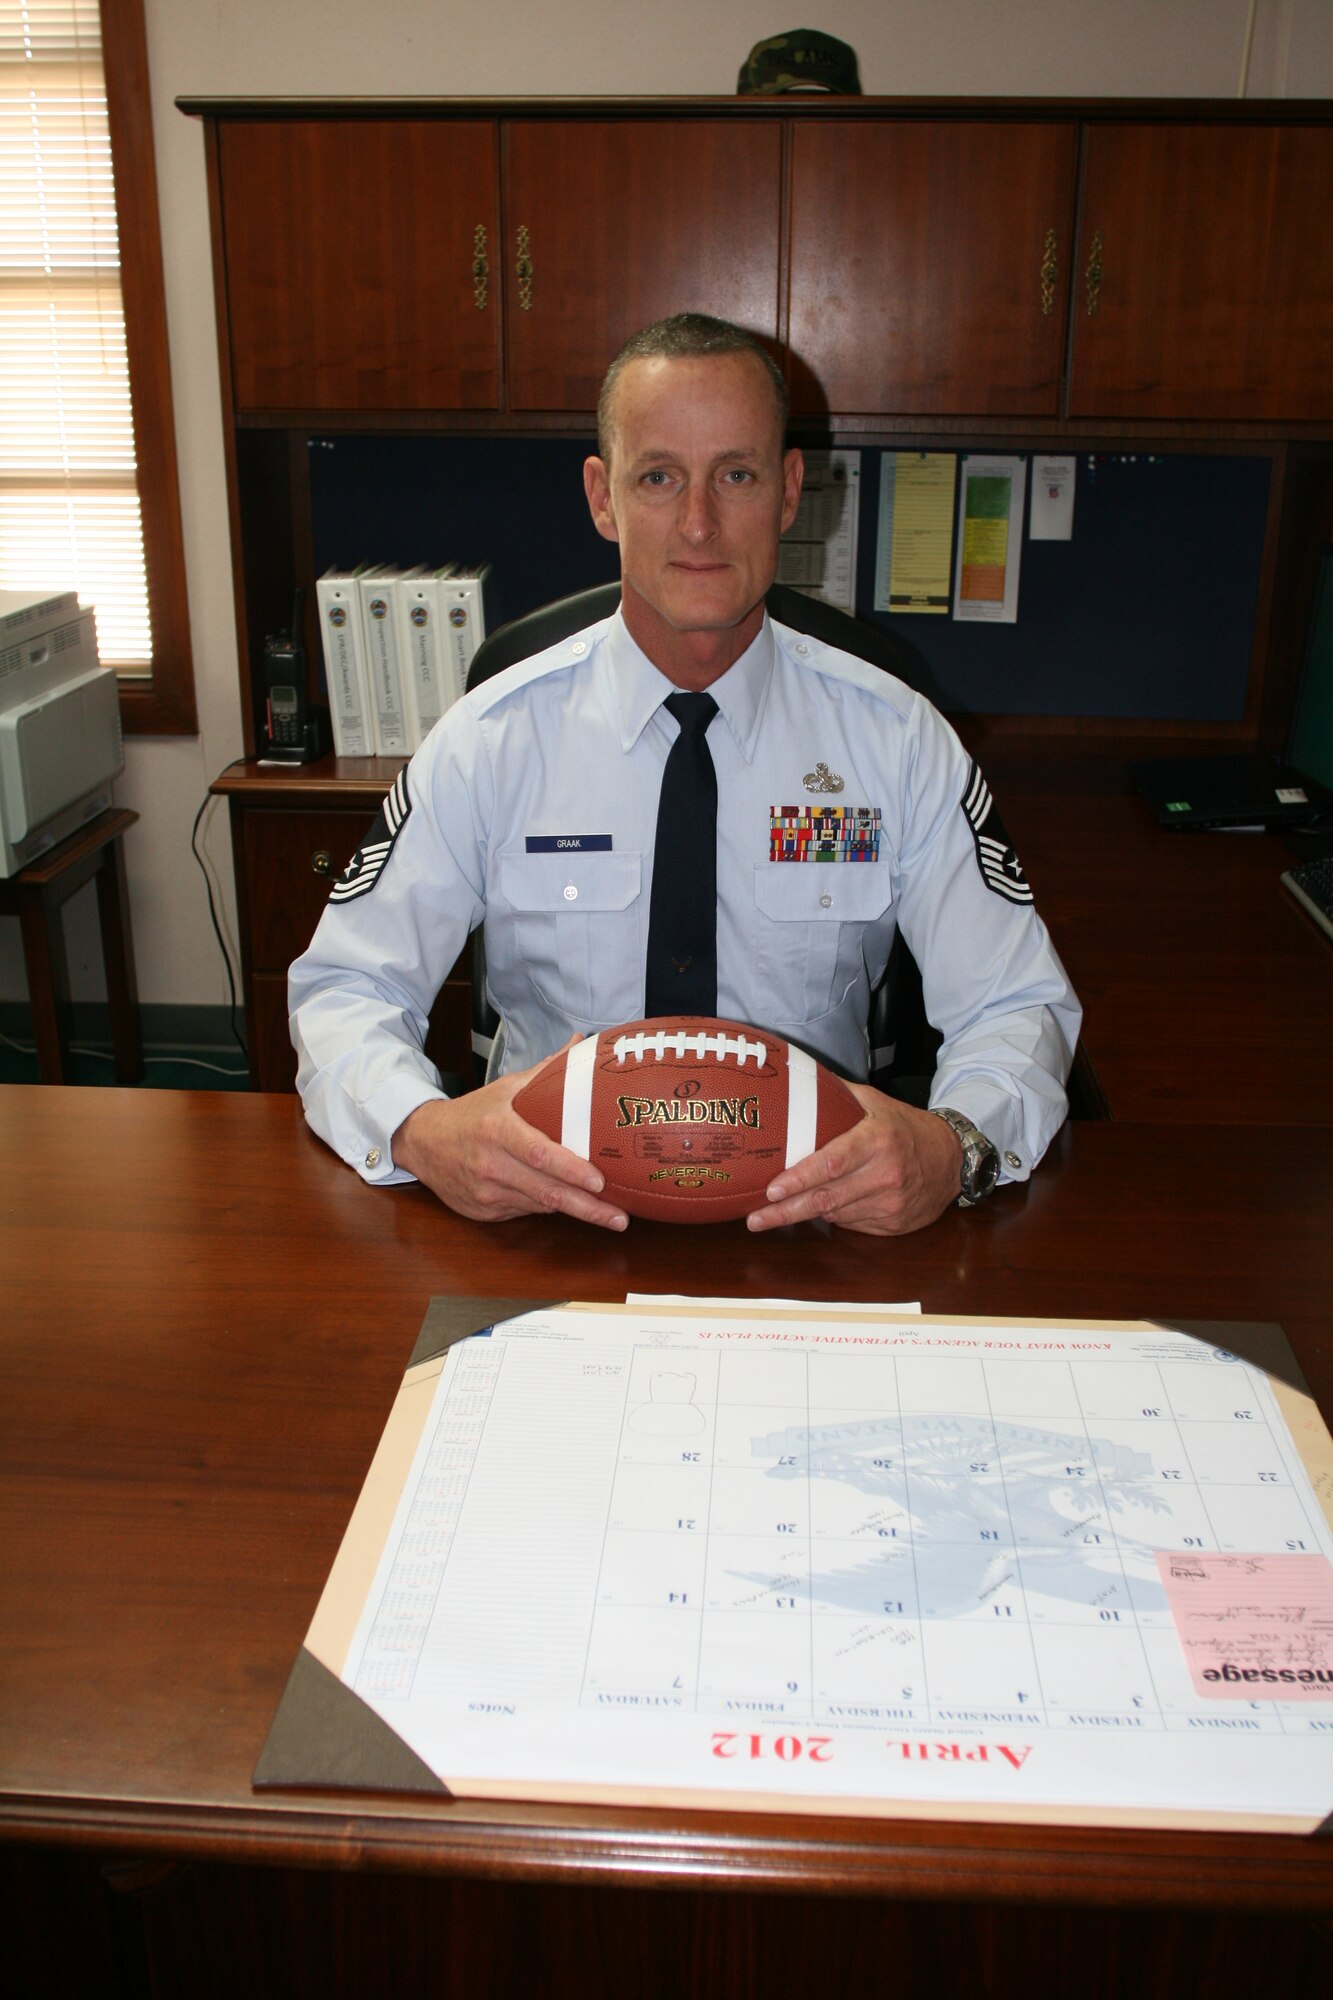 Chief Master Sgt. David Graak, 734th Air Mobility Squadron, enjoys football and other sports activities as a part of maintaining a healthy lifestyle. (U.S. Air Force photo by Staff Sgt. Anthony Miller)